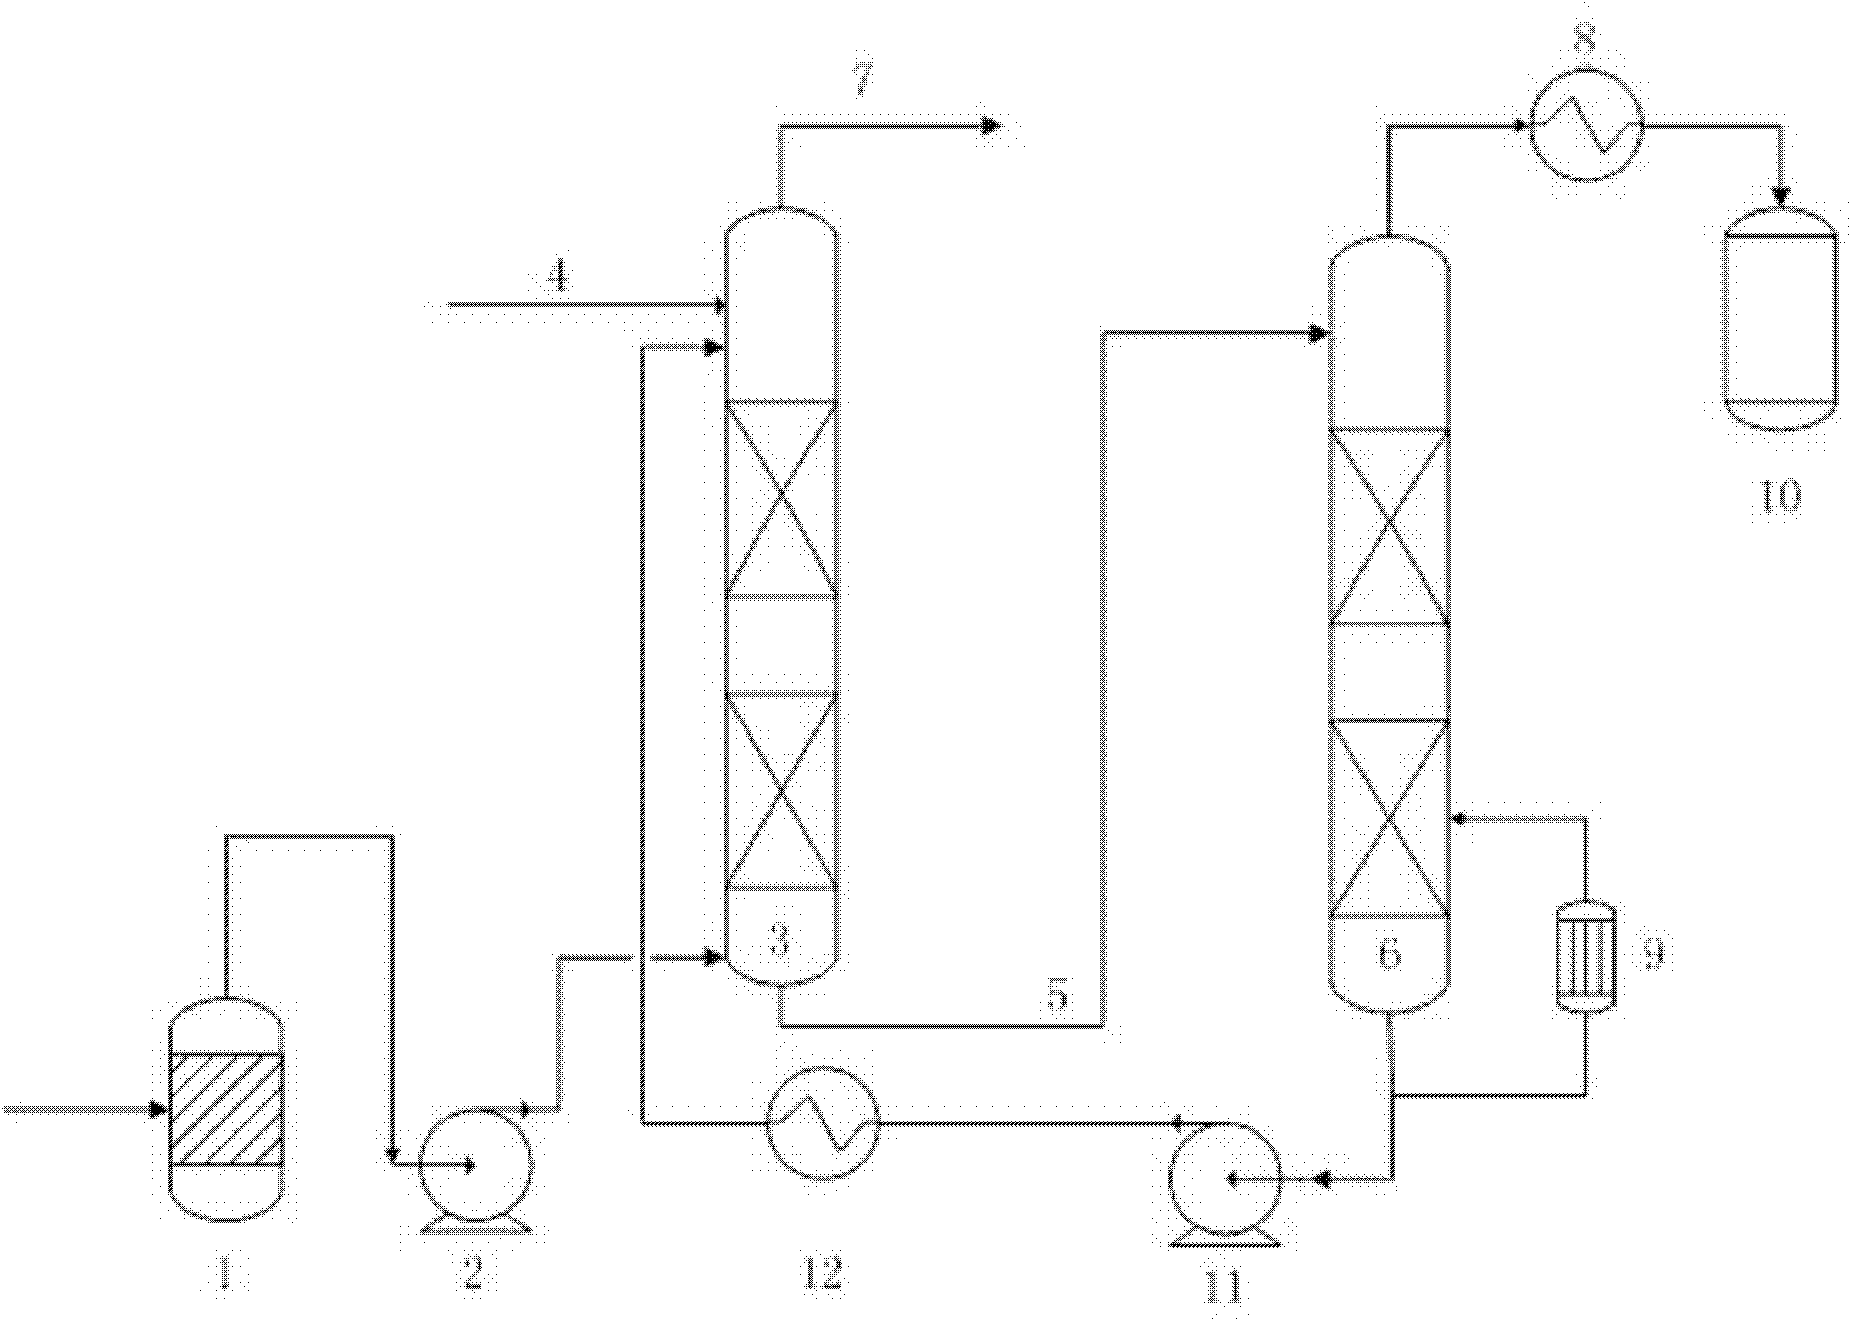 Resource tail gas treatment system and technology for soil vapor extraction repair technique